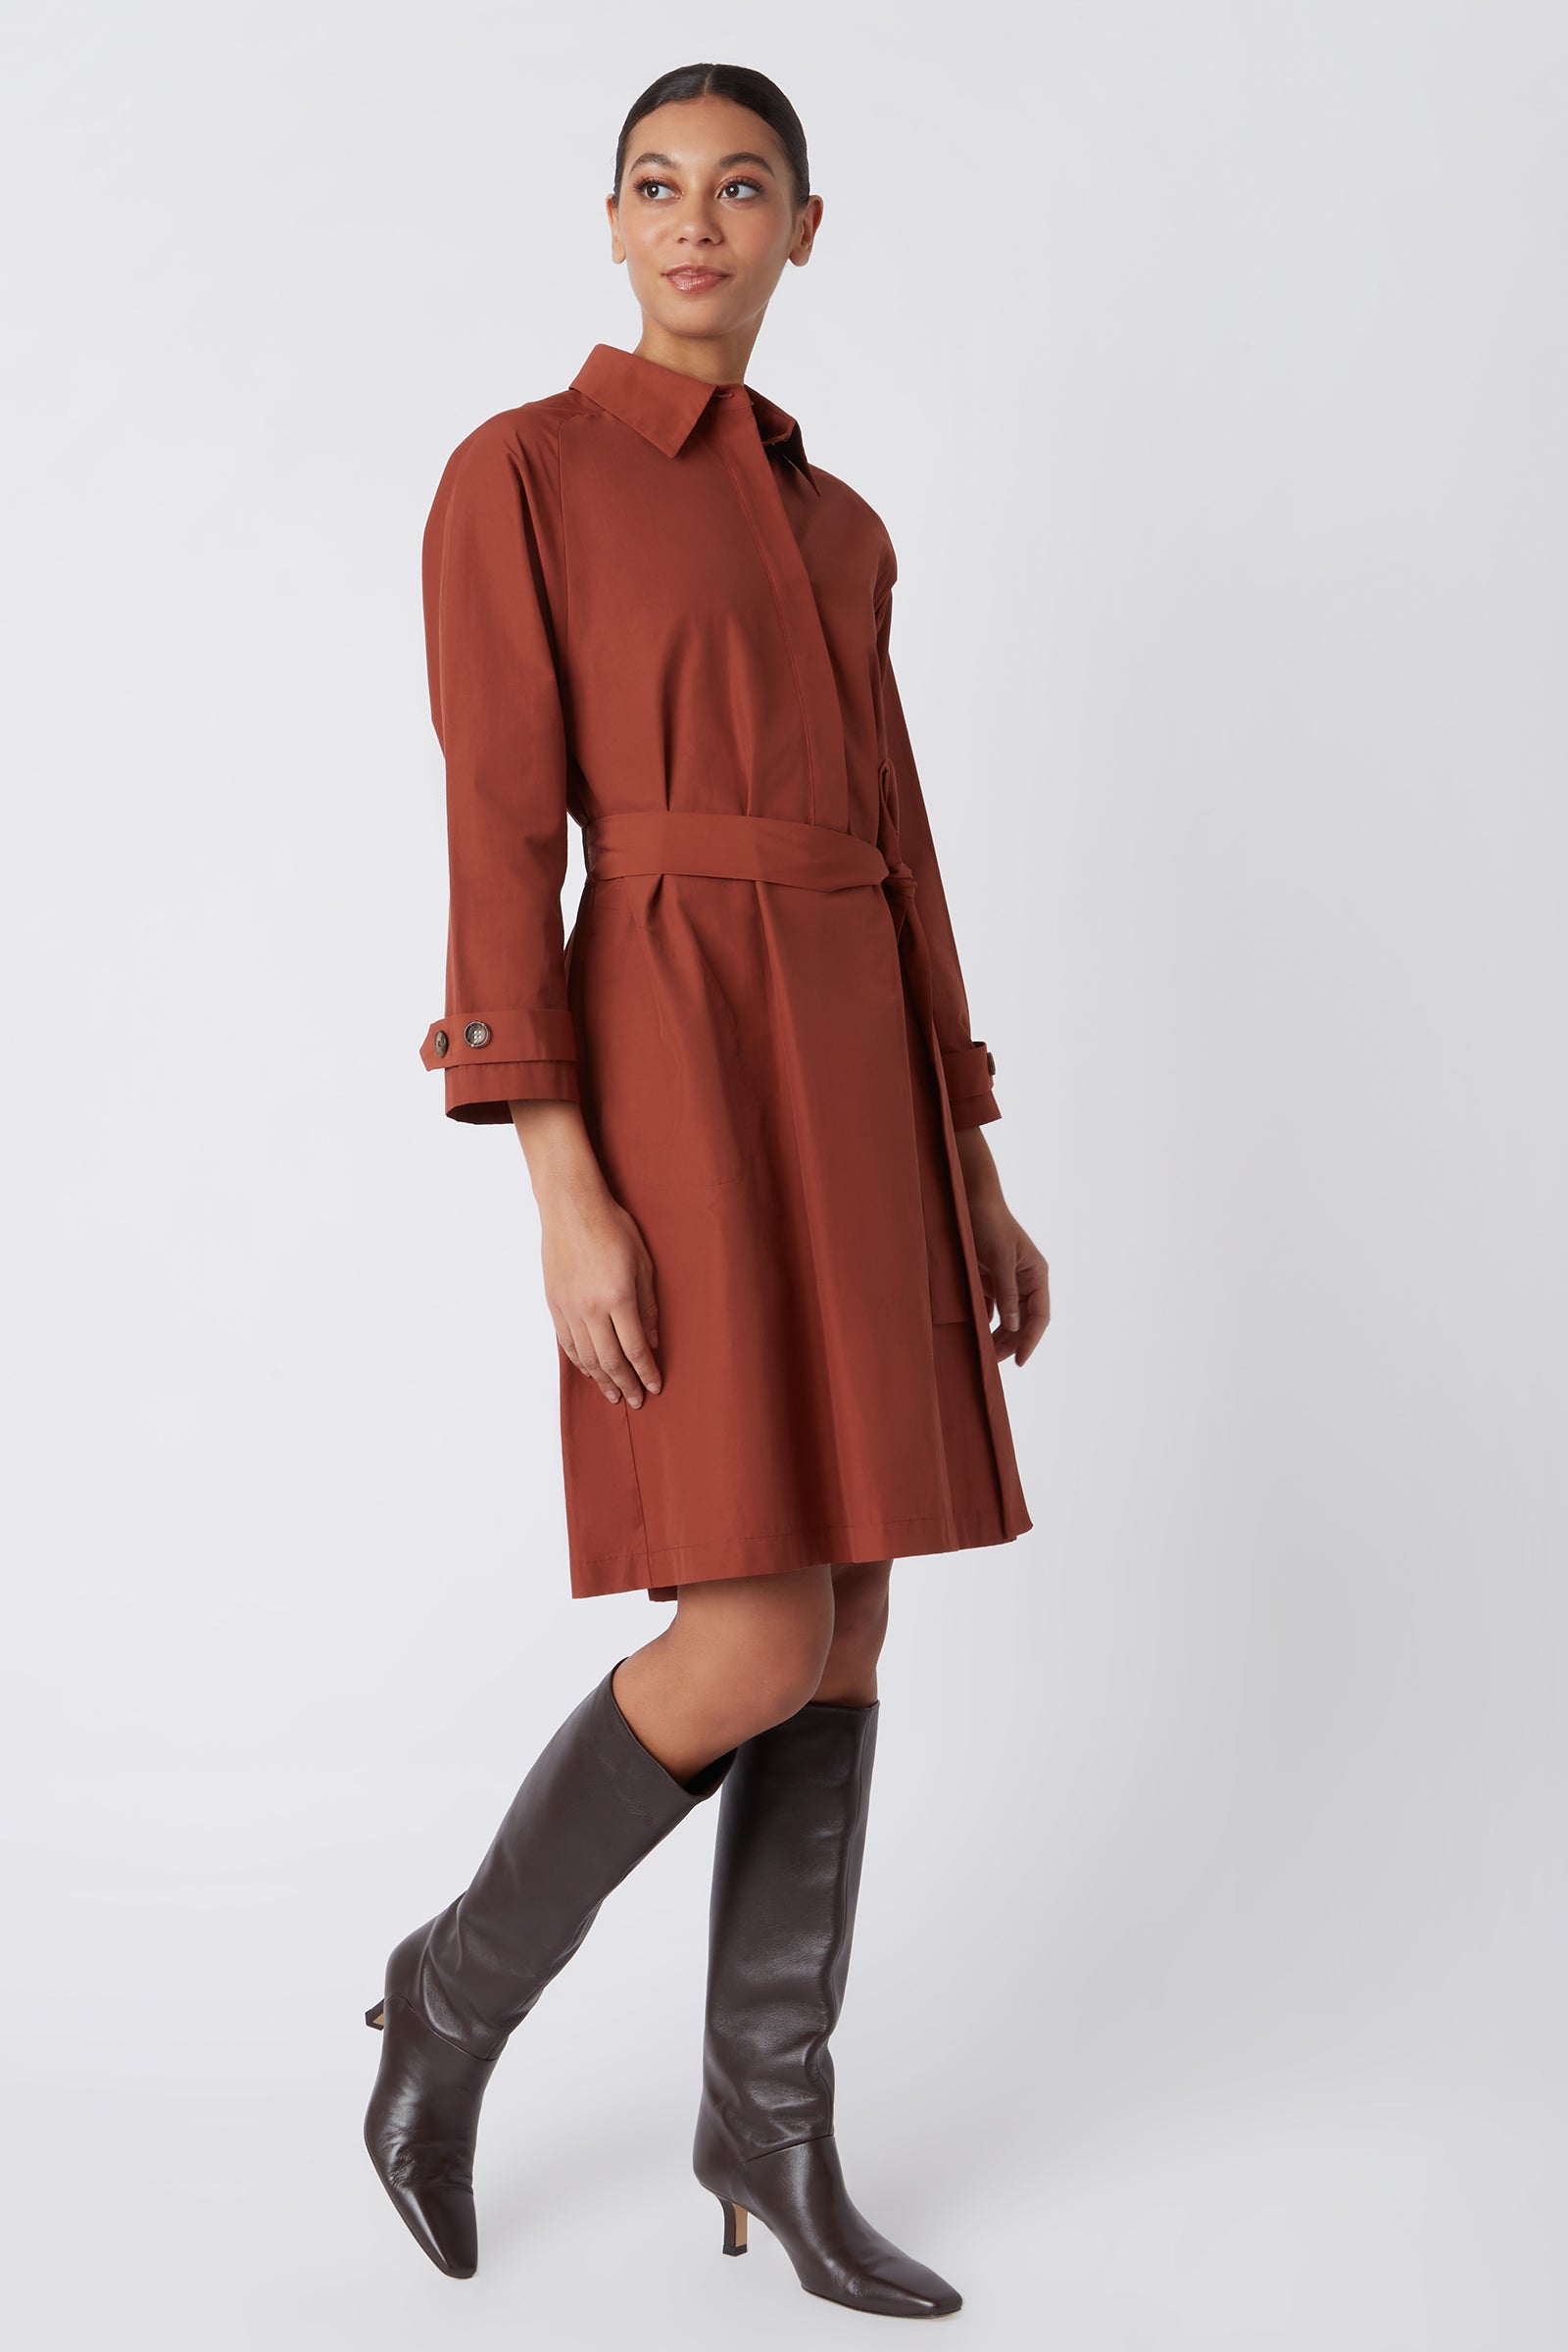 Bonnie Pleat Back Dress in Rust Italian Broadcloth with Trench Detail ...